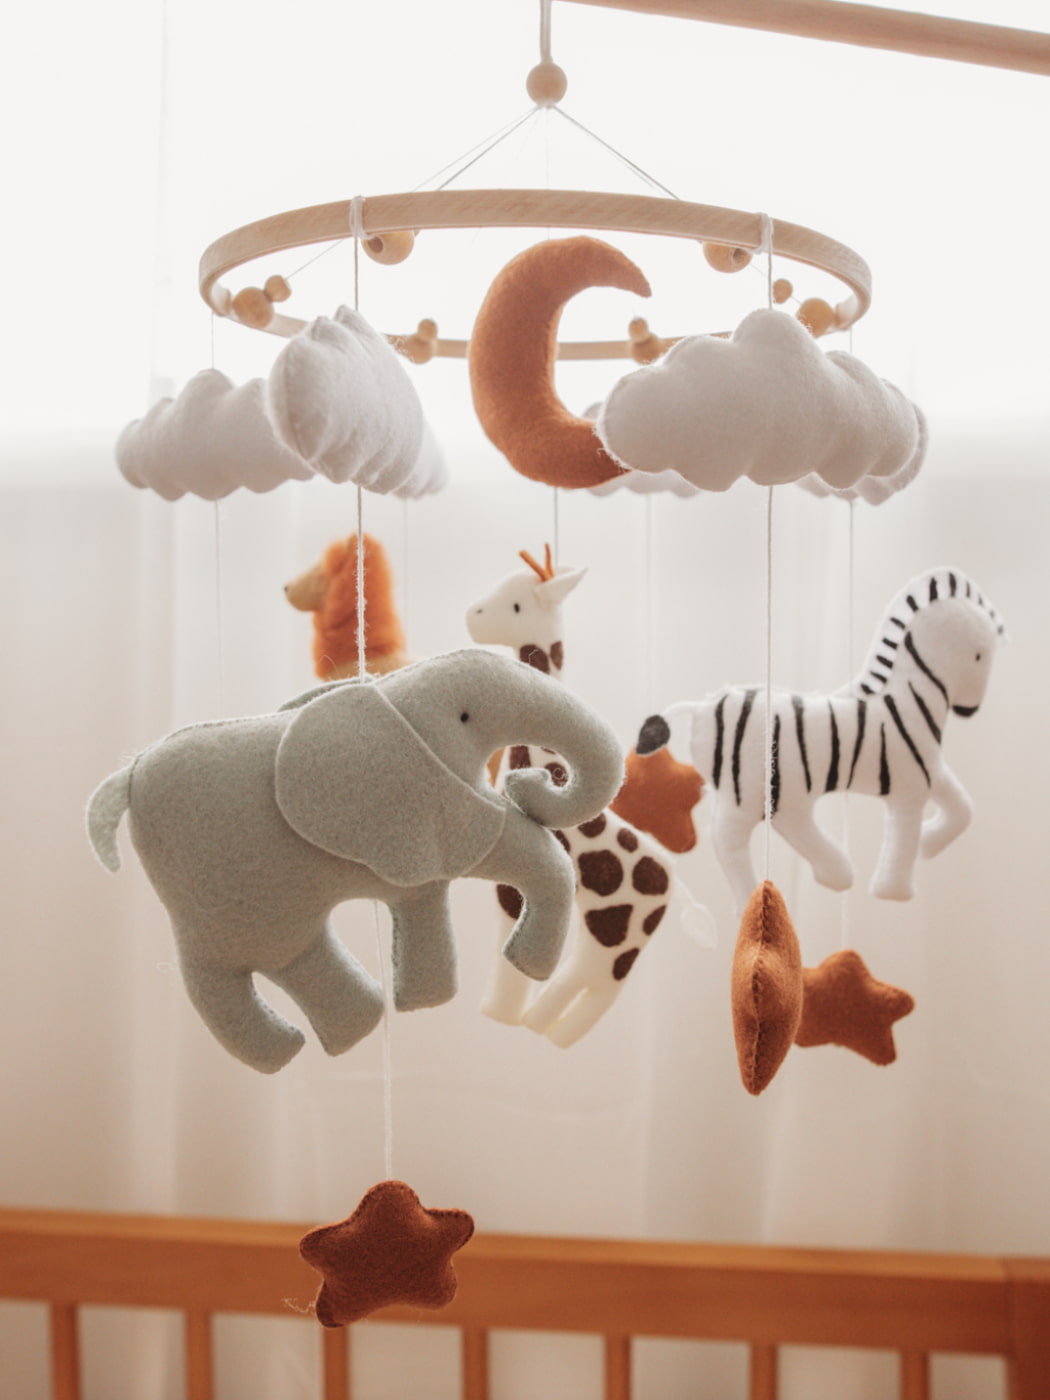 baby mobile with safari animals including an elephant, giraffe, zebra and lion